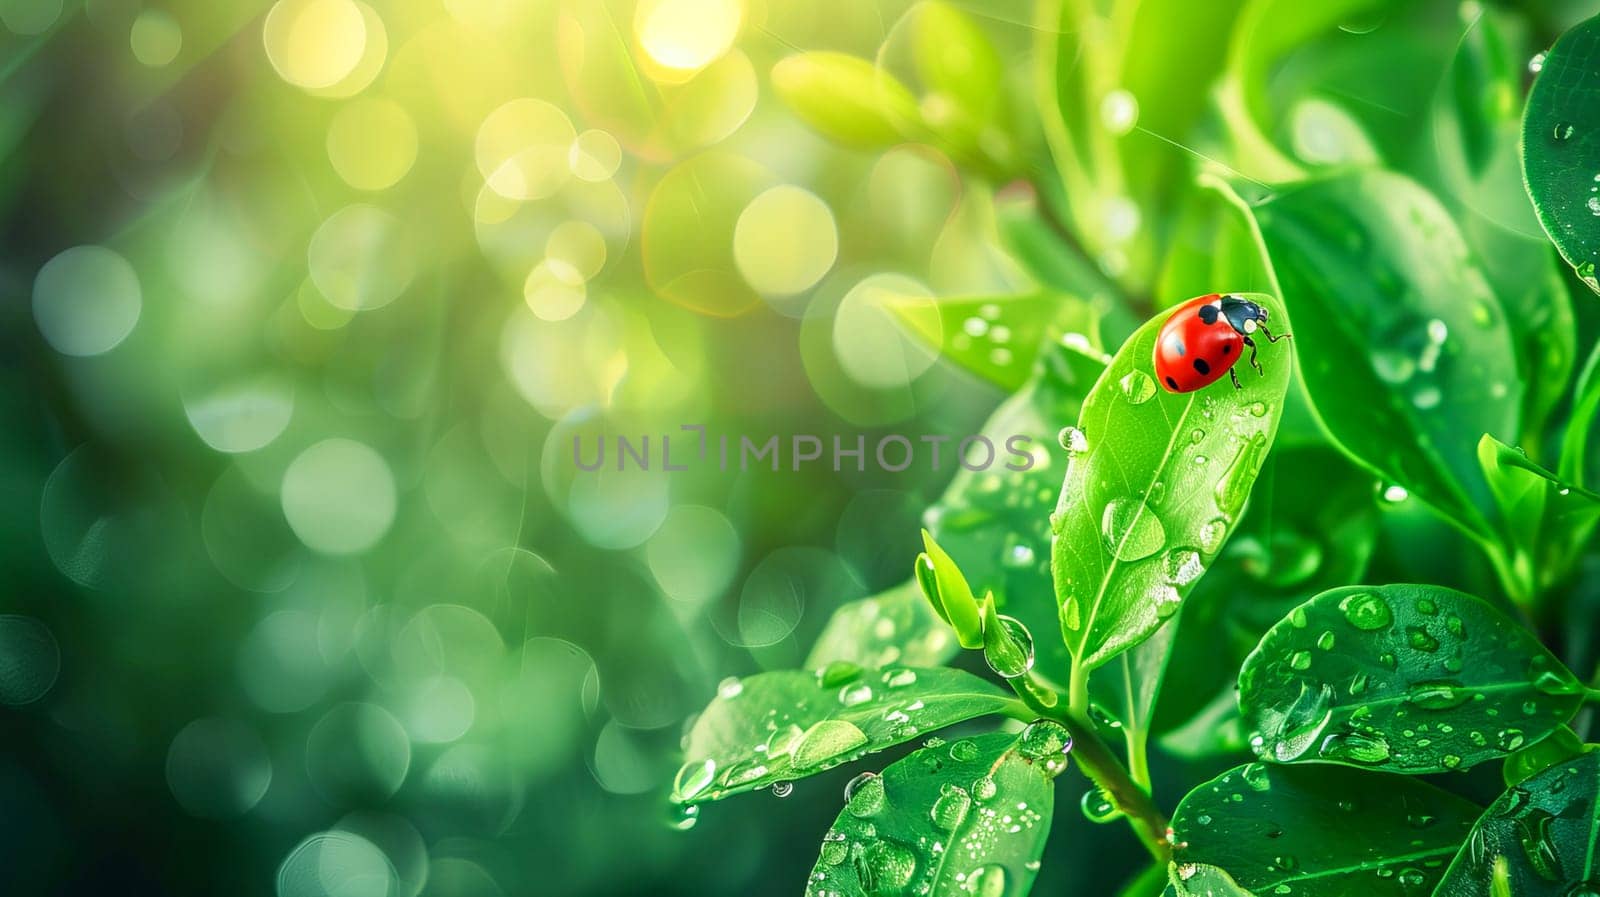 Ladybug on green leaves with morning dew, nature background with water drops and copy space. AI generated.